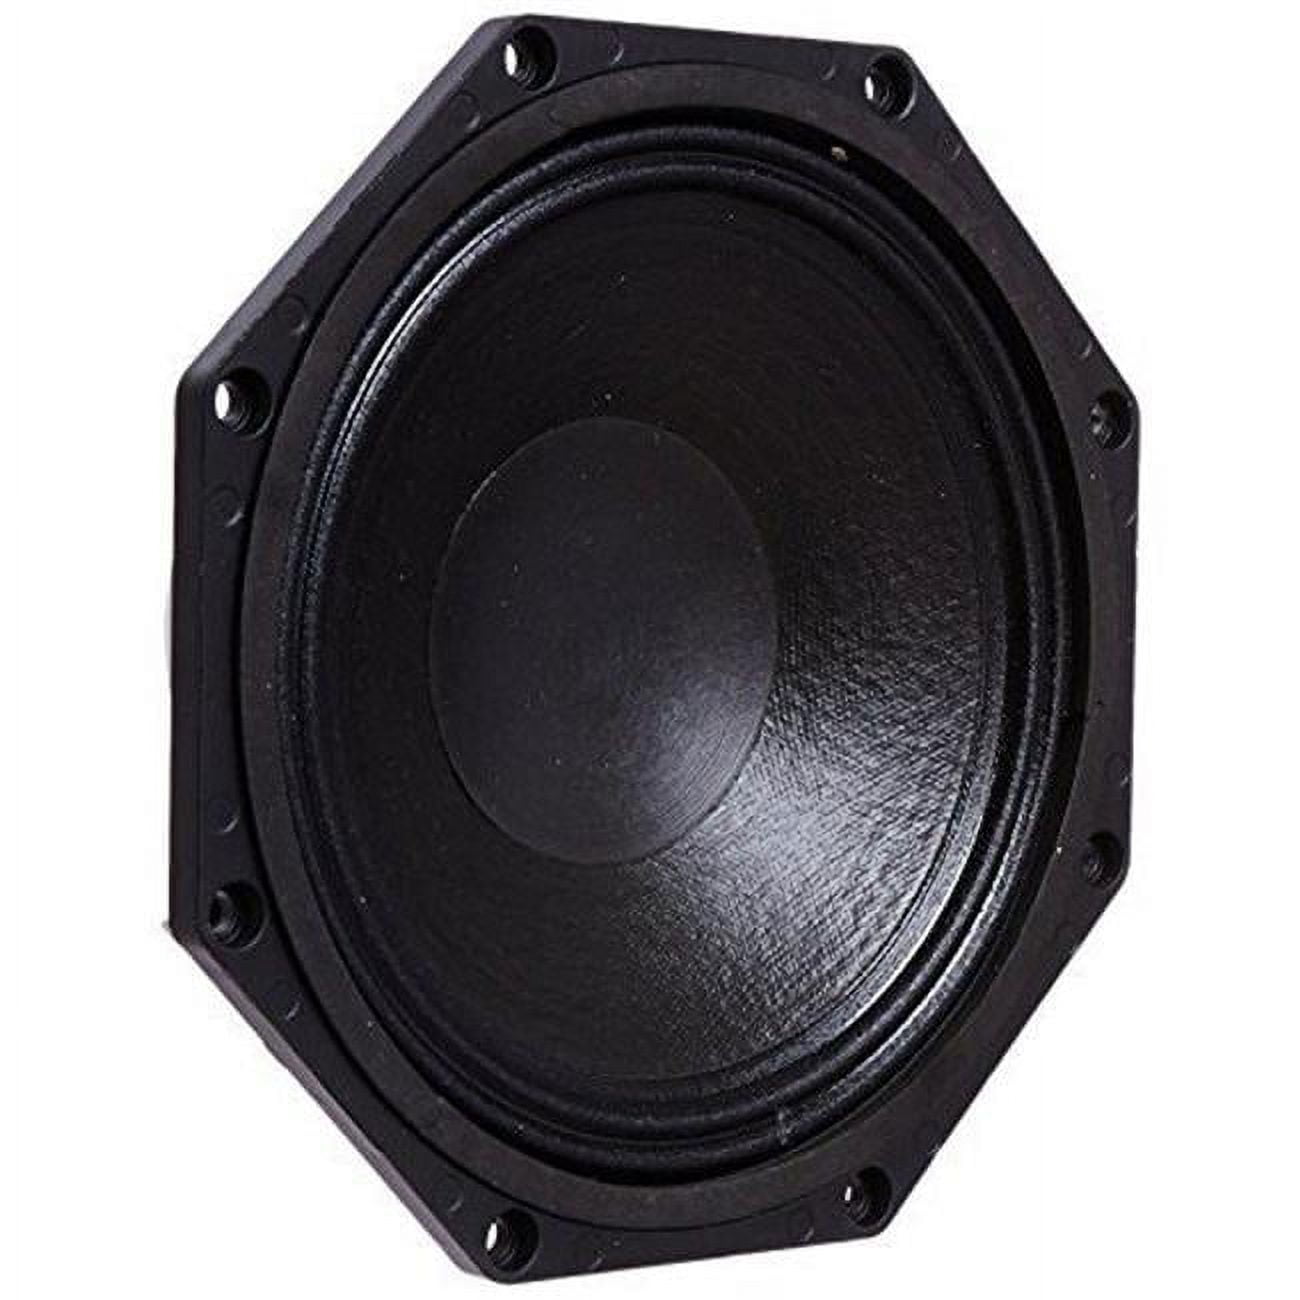 Picture of B & C Speakers 8NW51 8 in. Lightweight Mid-Bass Woofer